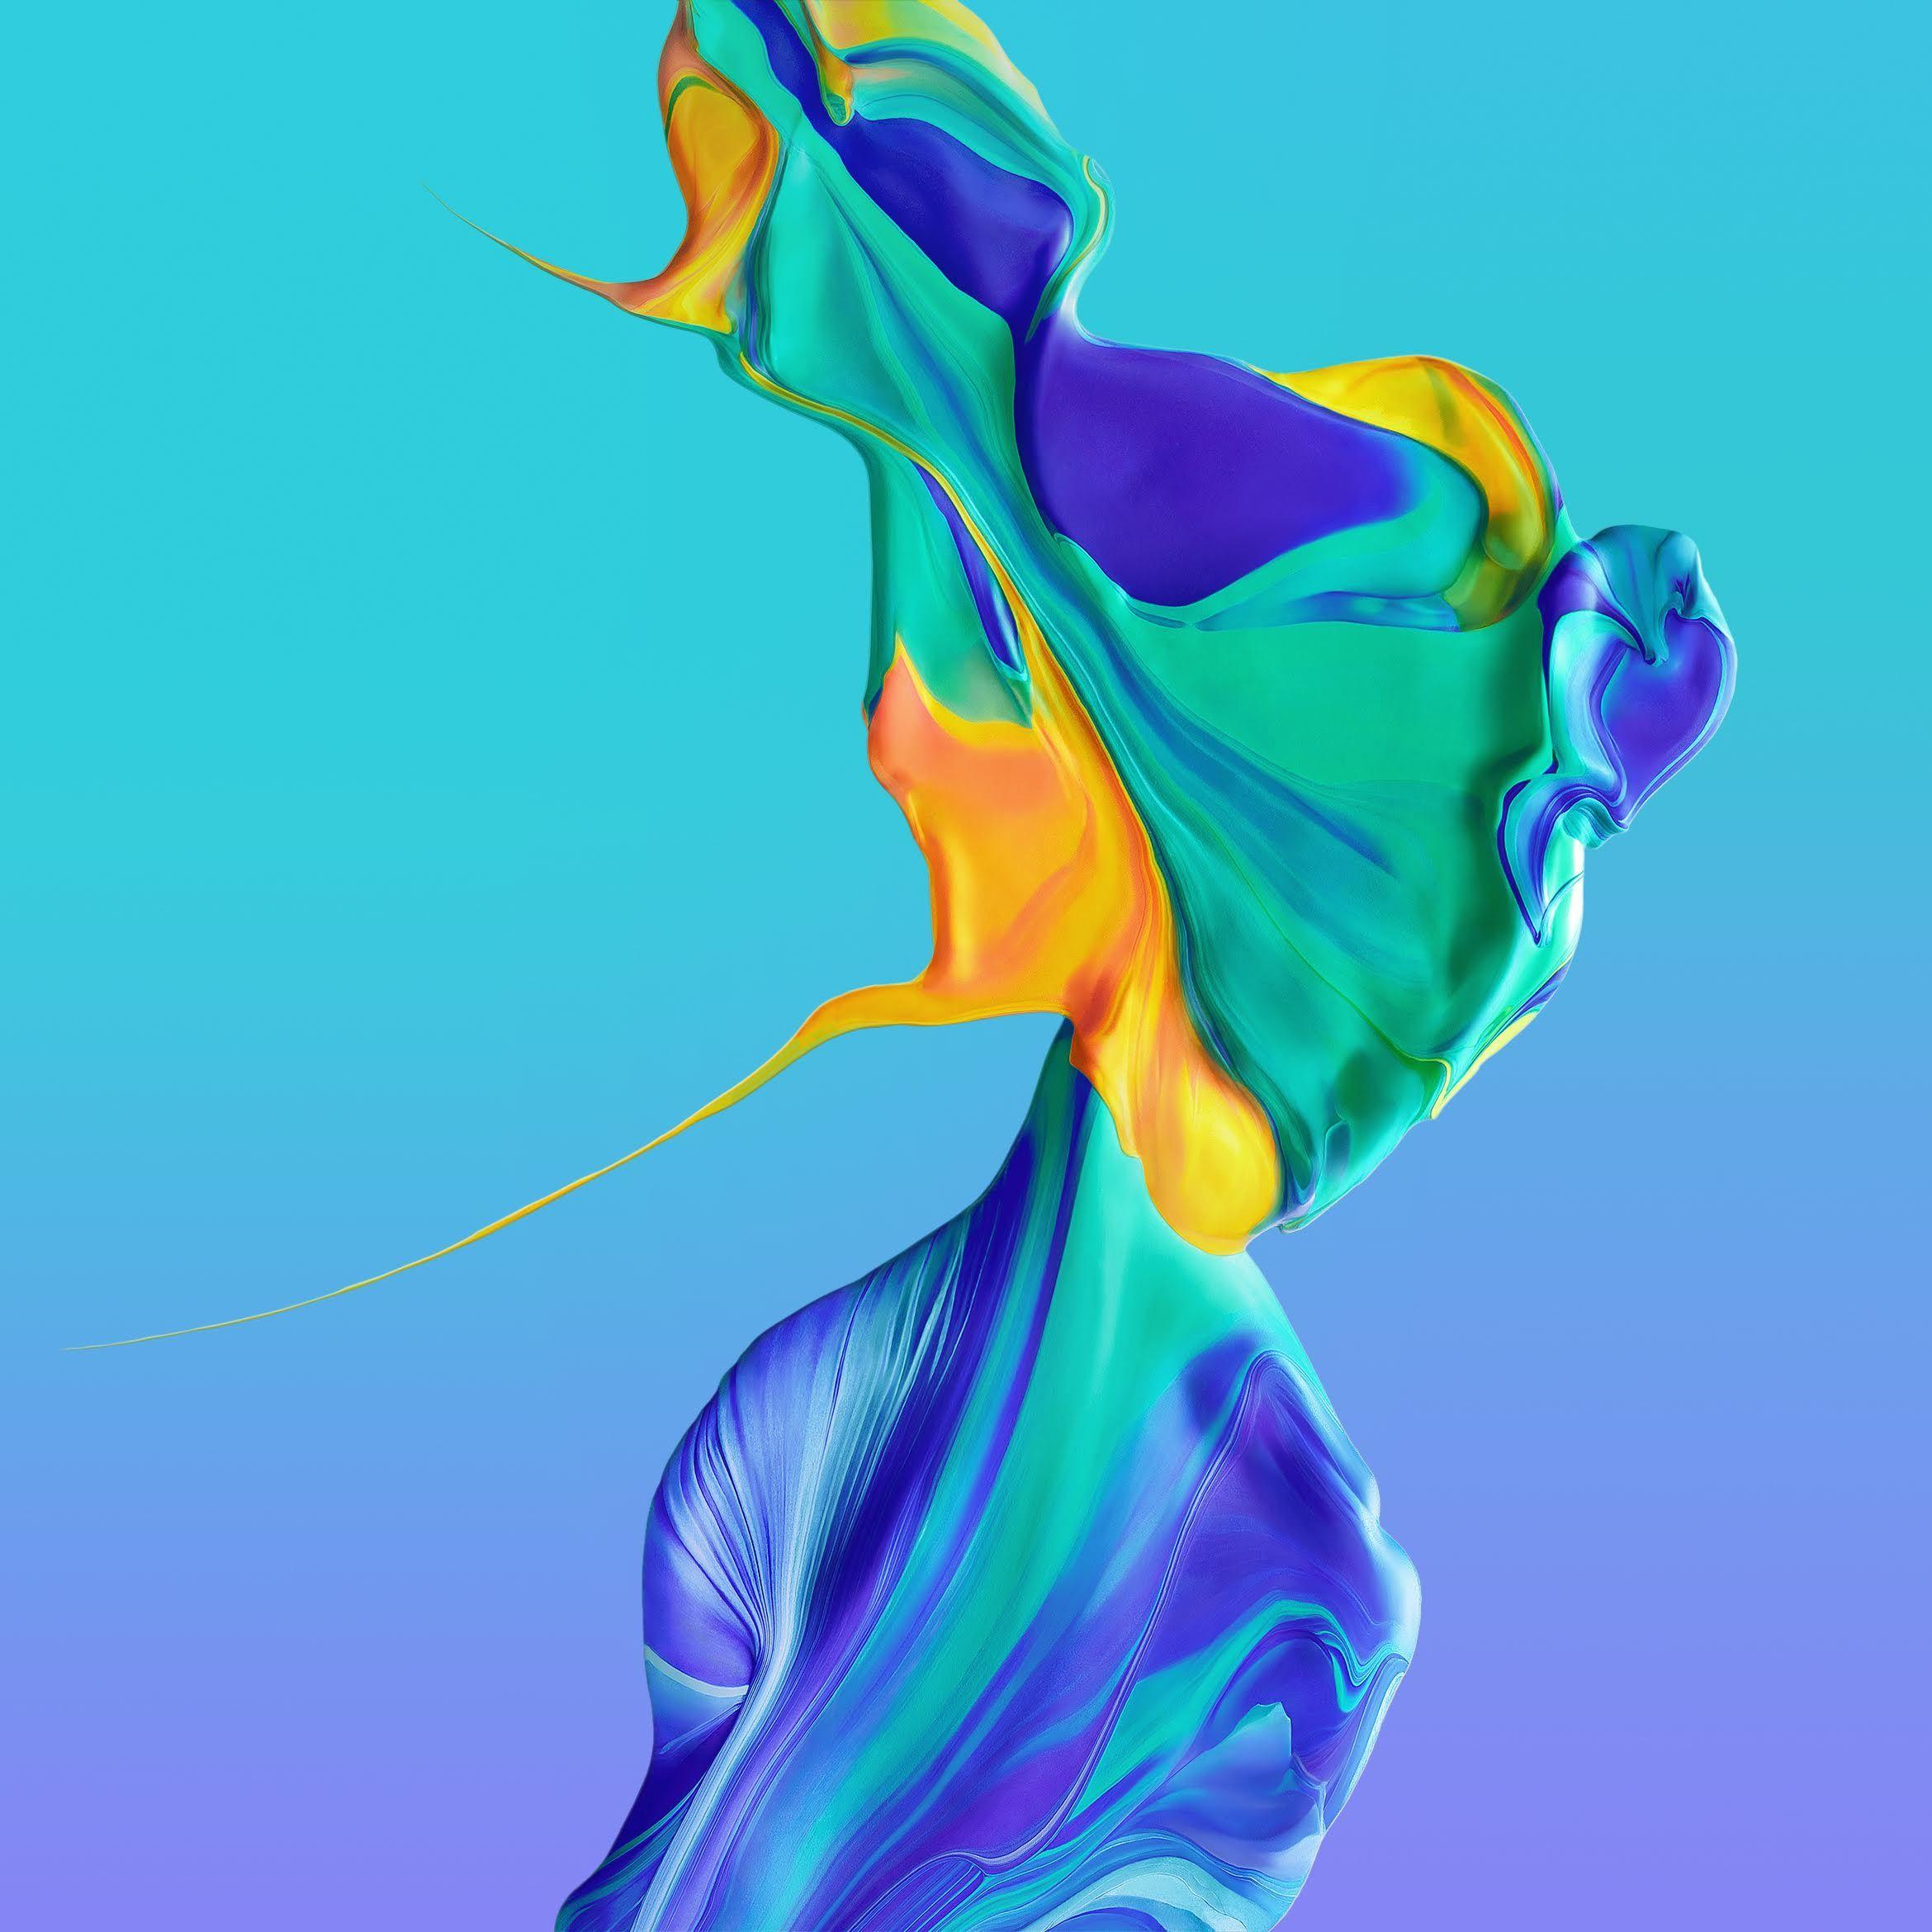 Download Huawei P30 and P30 Pro Official Wallpaper Here